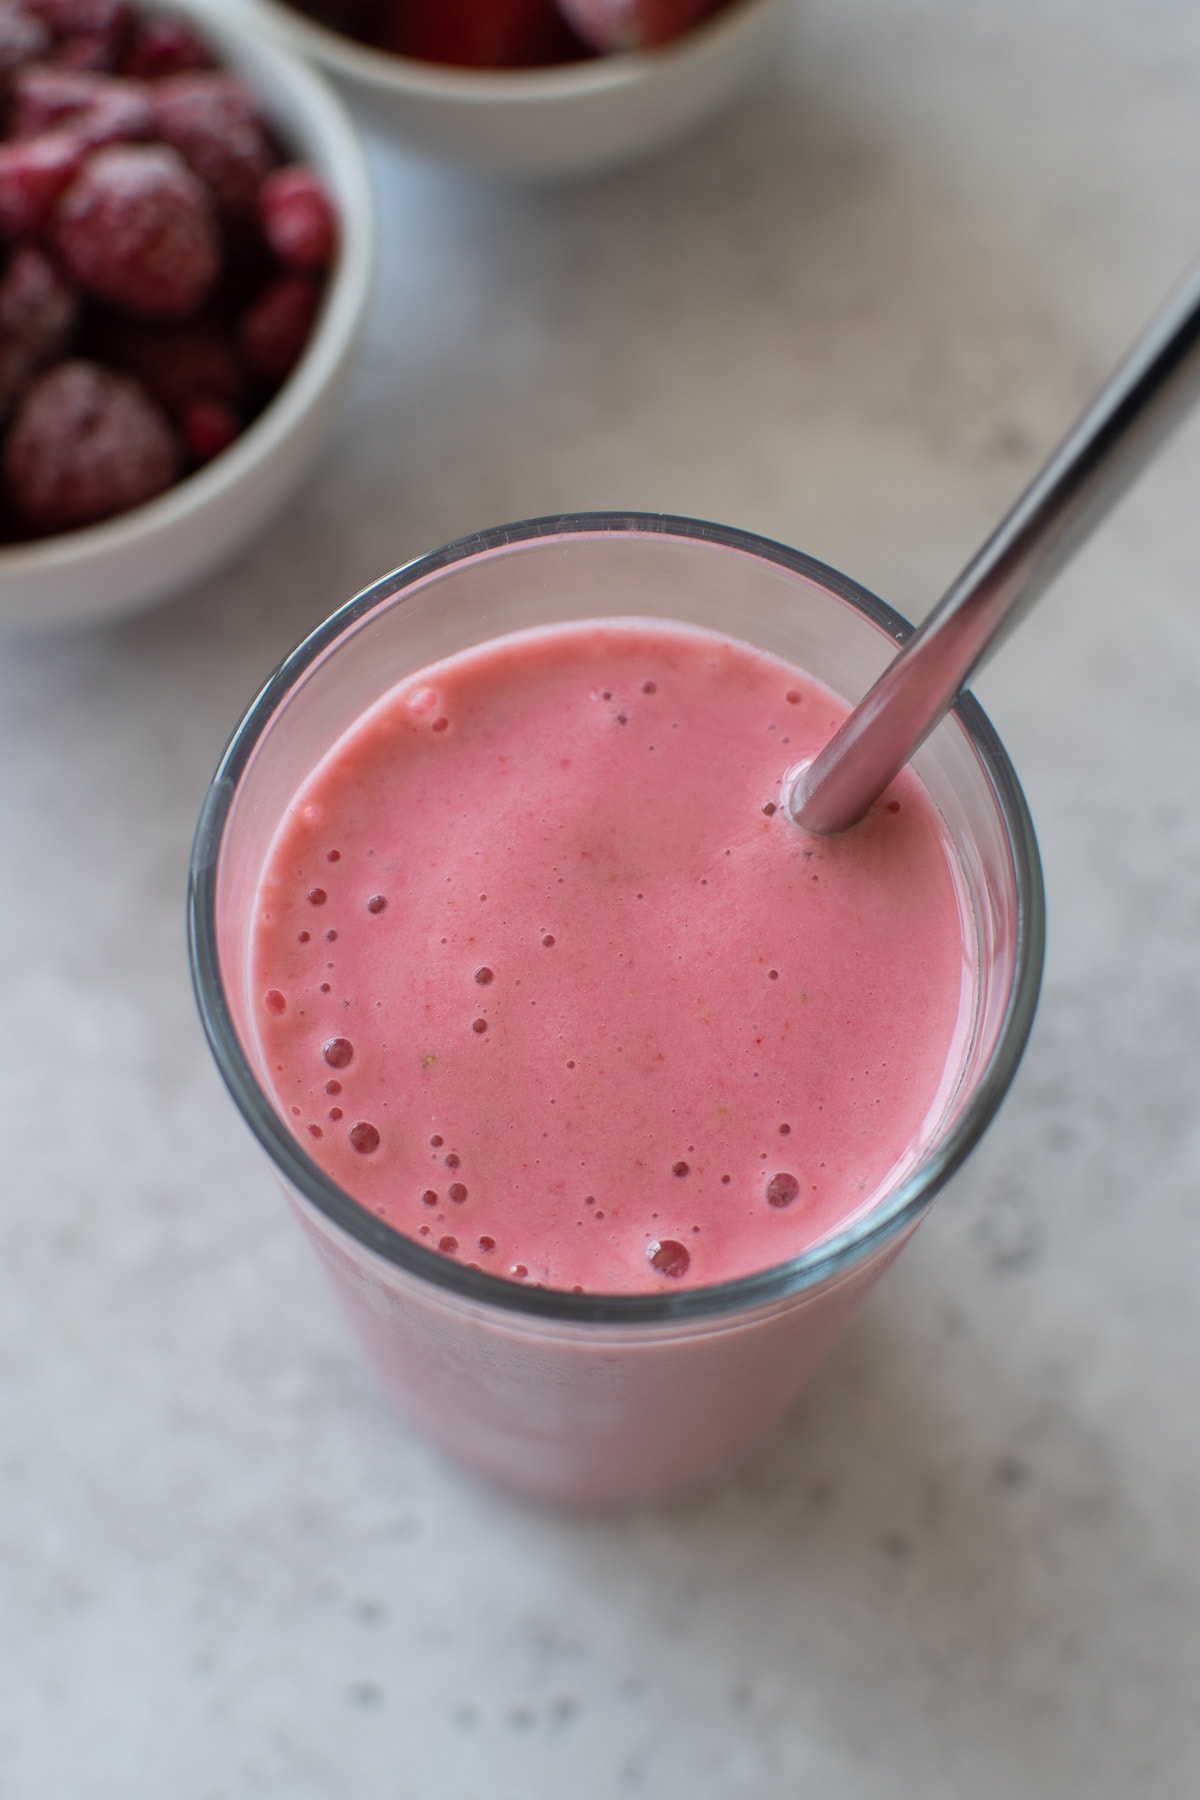 A glass of pink smoothie with a metal straw.